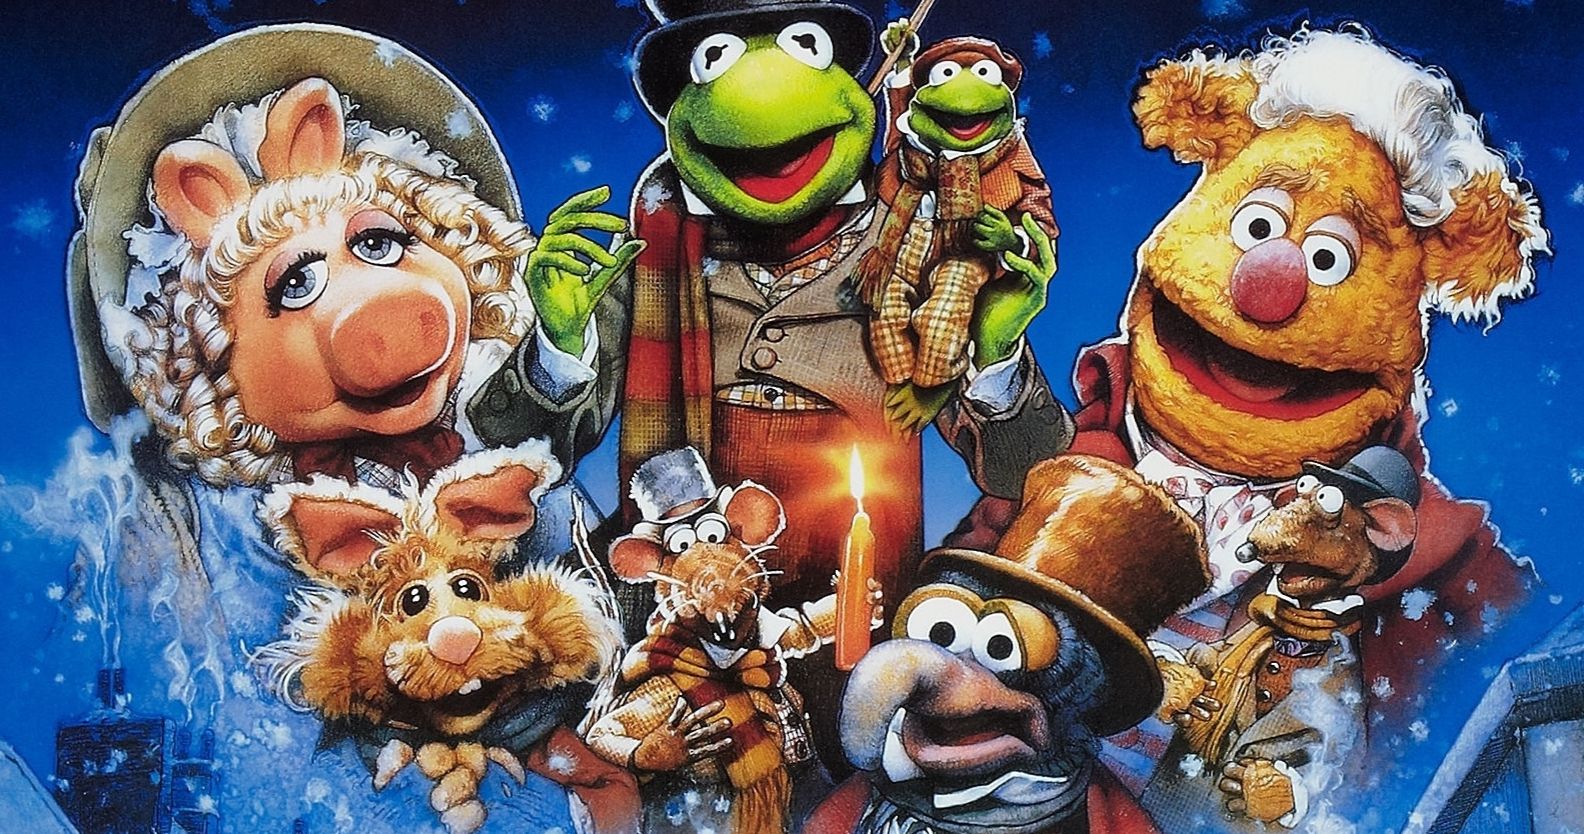 The Muppet Christmas Carol Is the Best Scrooge Movie Declares Guillermo Del Toro